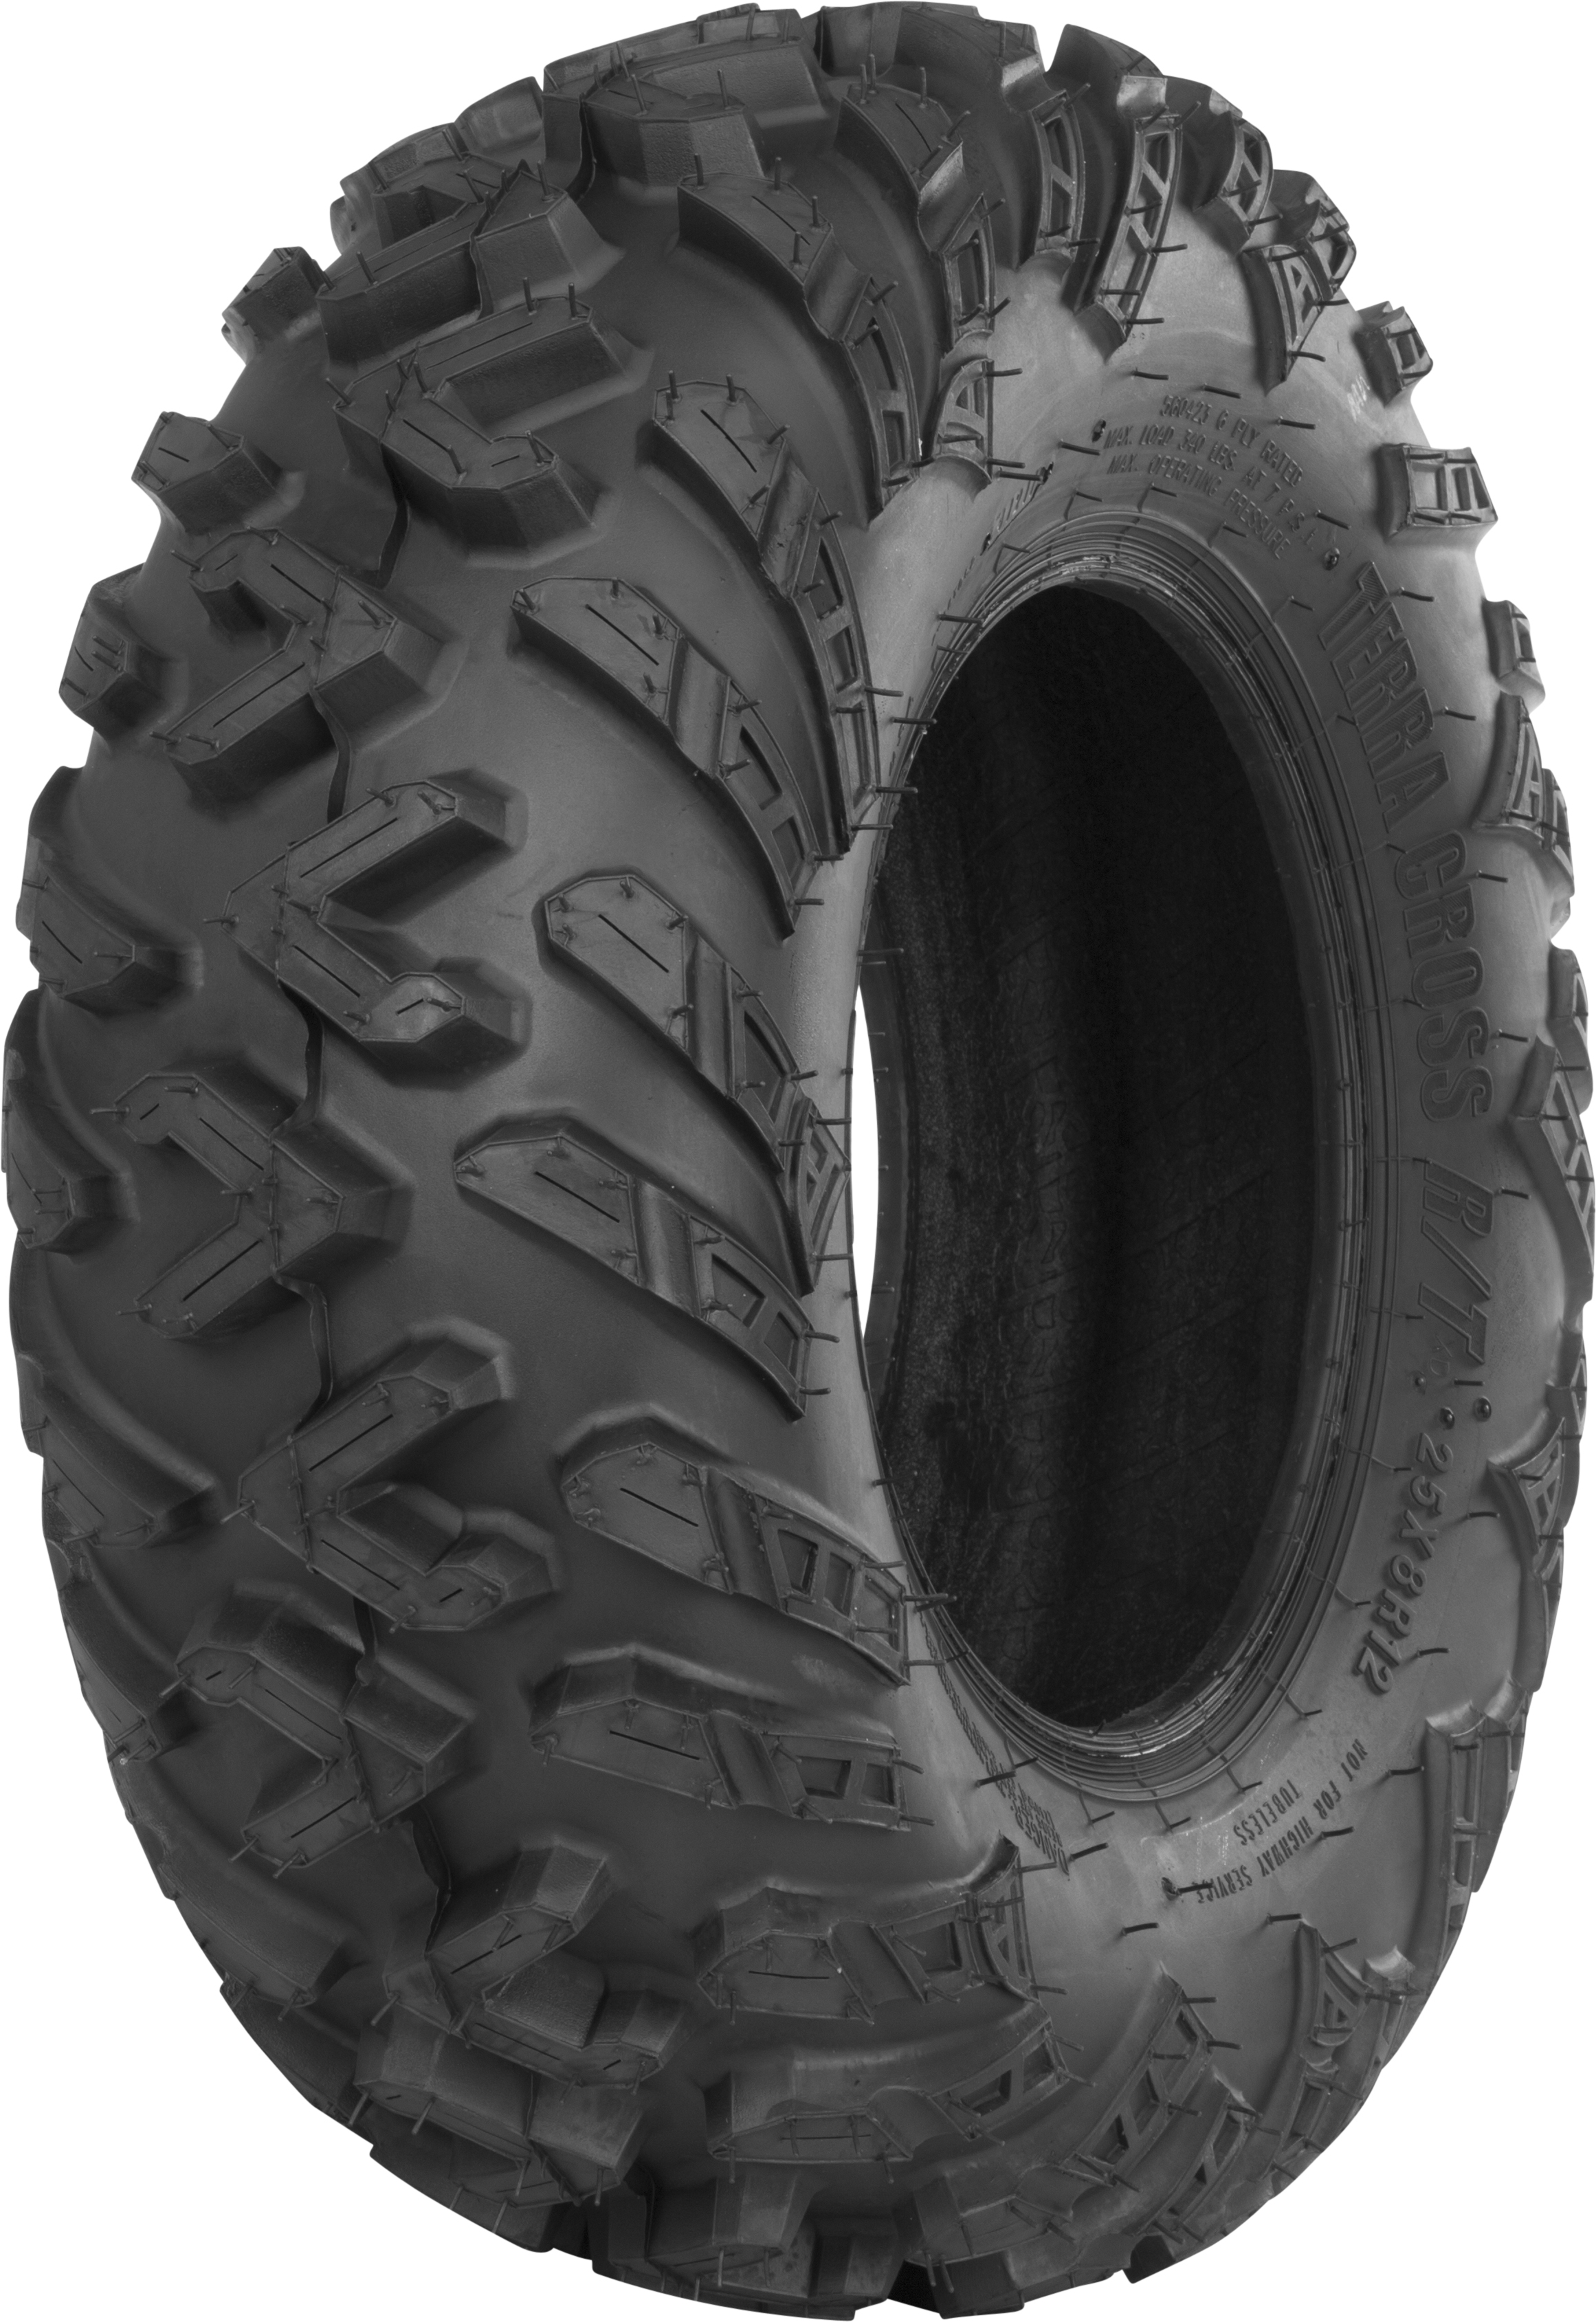 TERRACROSS R/T FRONT TIRE 26X9-14 6 -PLY - Click Image to Close